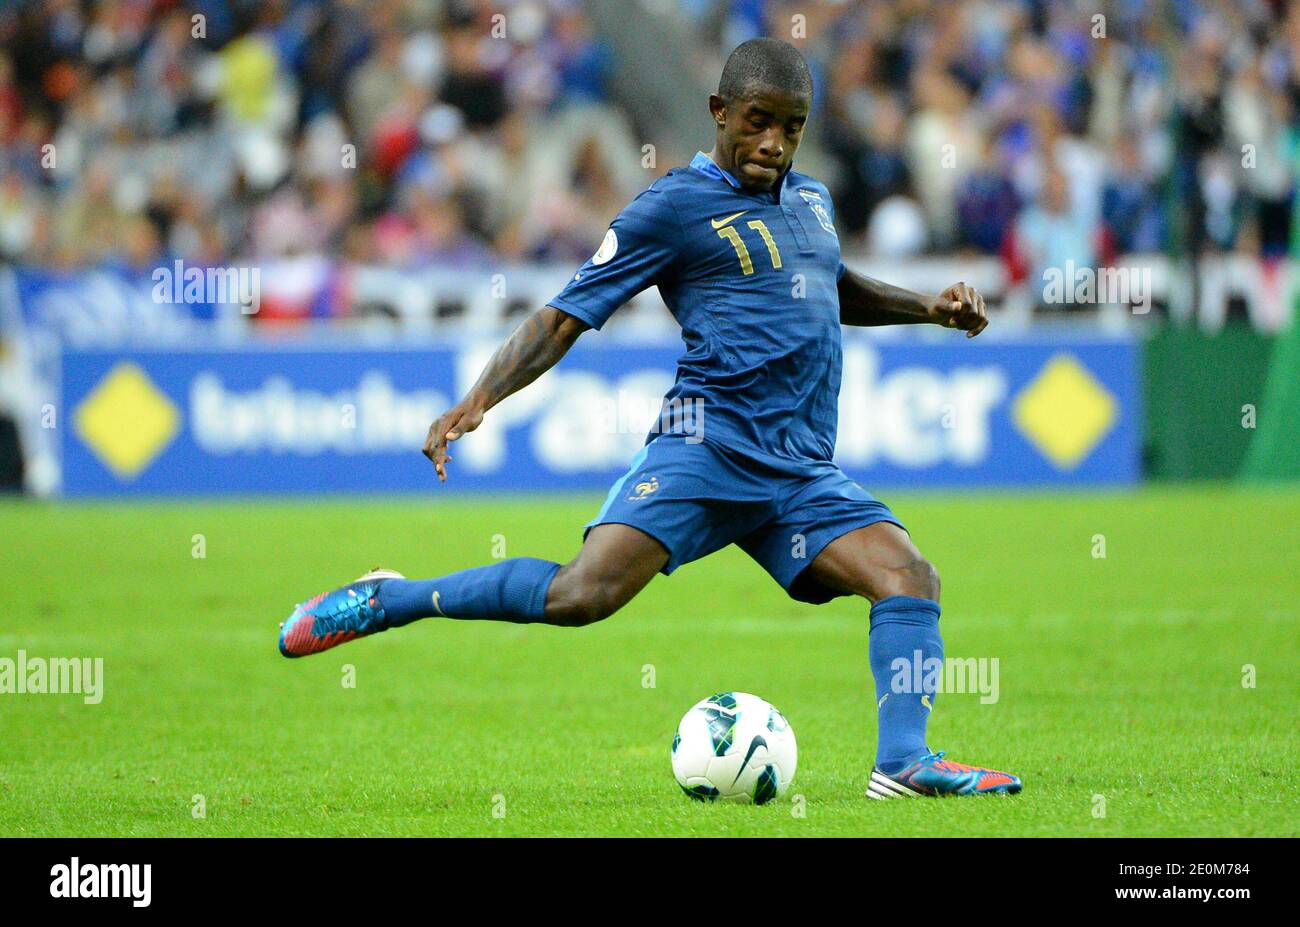 France's Rio Mavuba during the World Cup 2014 qualifying soccer match, France Vs Belarus at Stade de France in Saint-Denis near Paris, France on September 11, 2012. France won 3-1. Photo by Christian Liewig/ABACAPRESS.COM Stock Photo